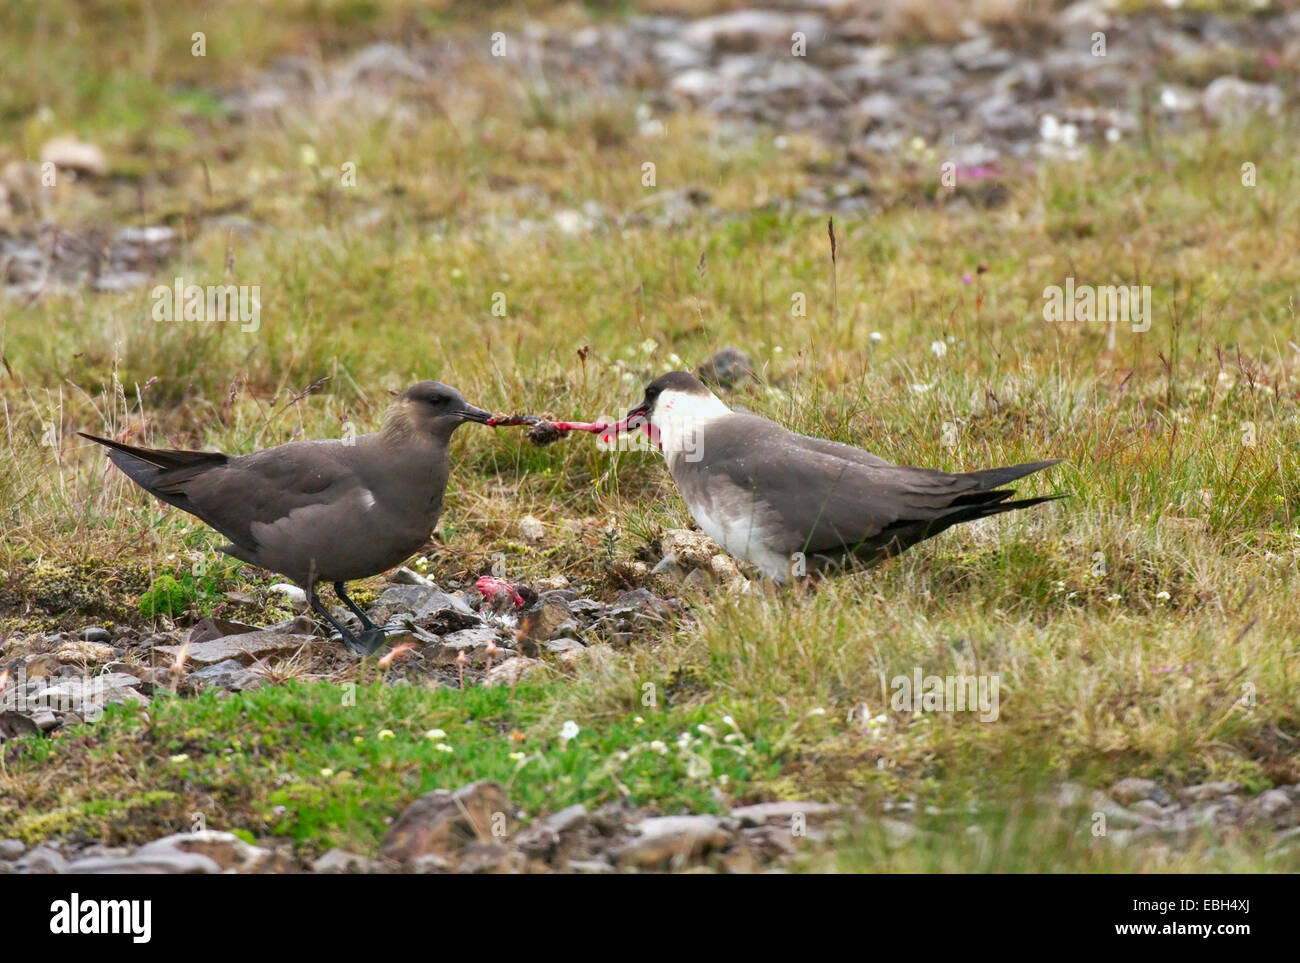 arctic skua (Stercorarius parasiticus), two individuals feeding on a chick, Iceland Stock Photo